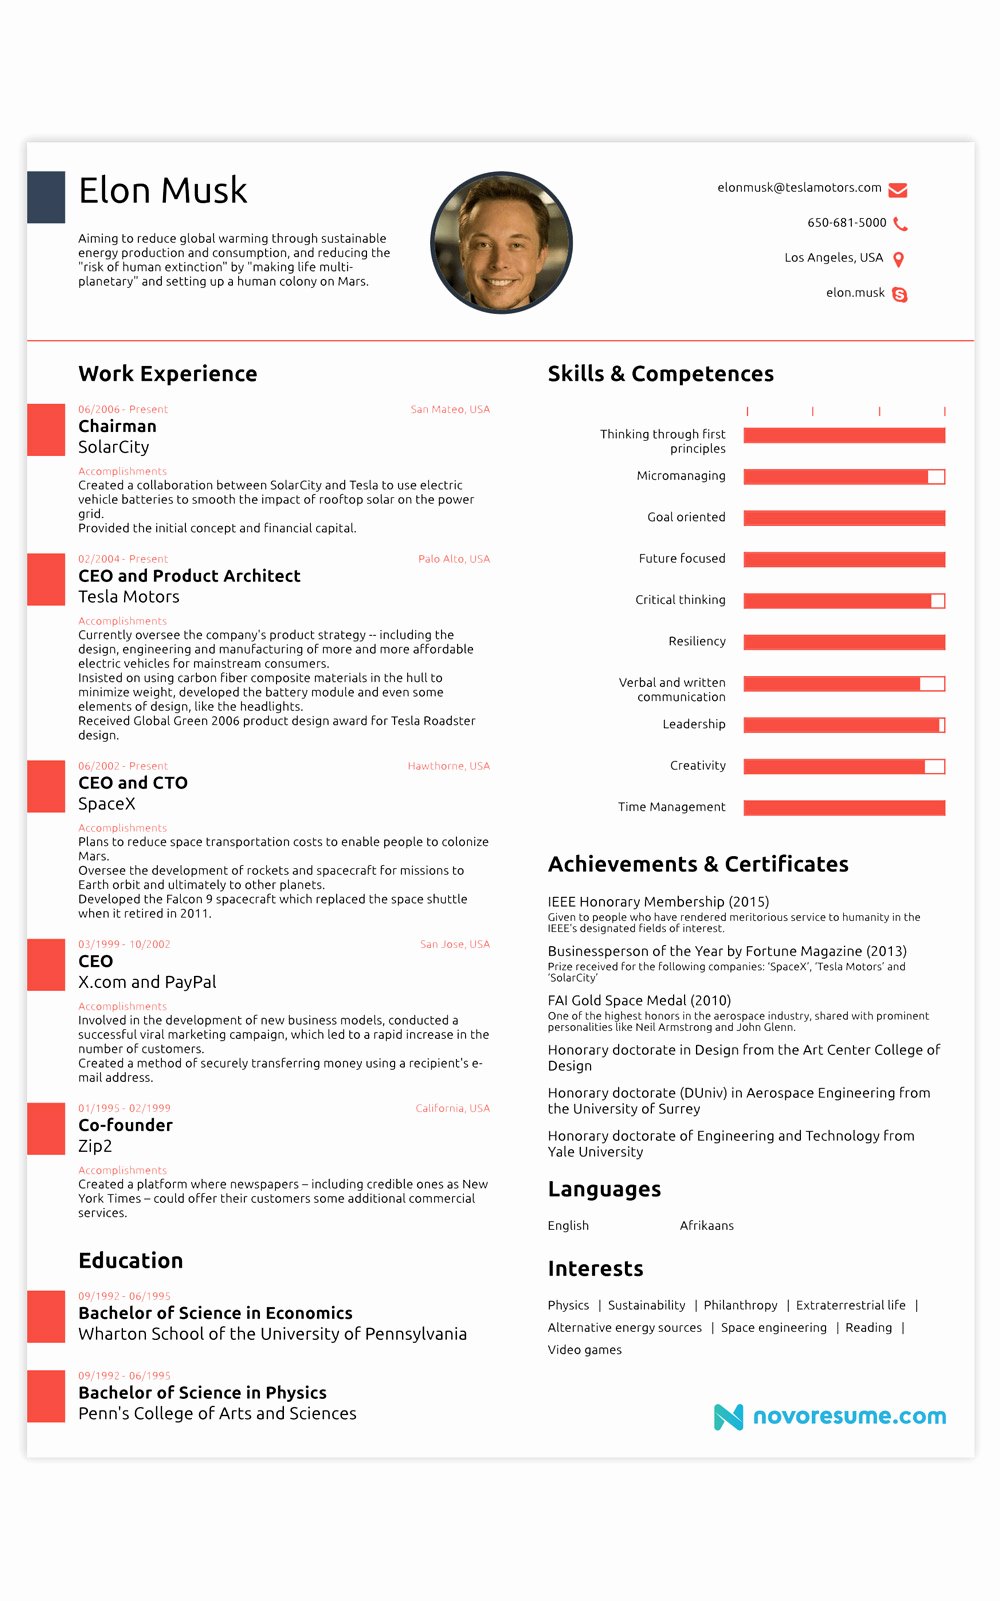 Elon Musk One Page Resume Fresh See How Your Salary Pares to People Your Age